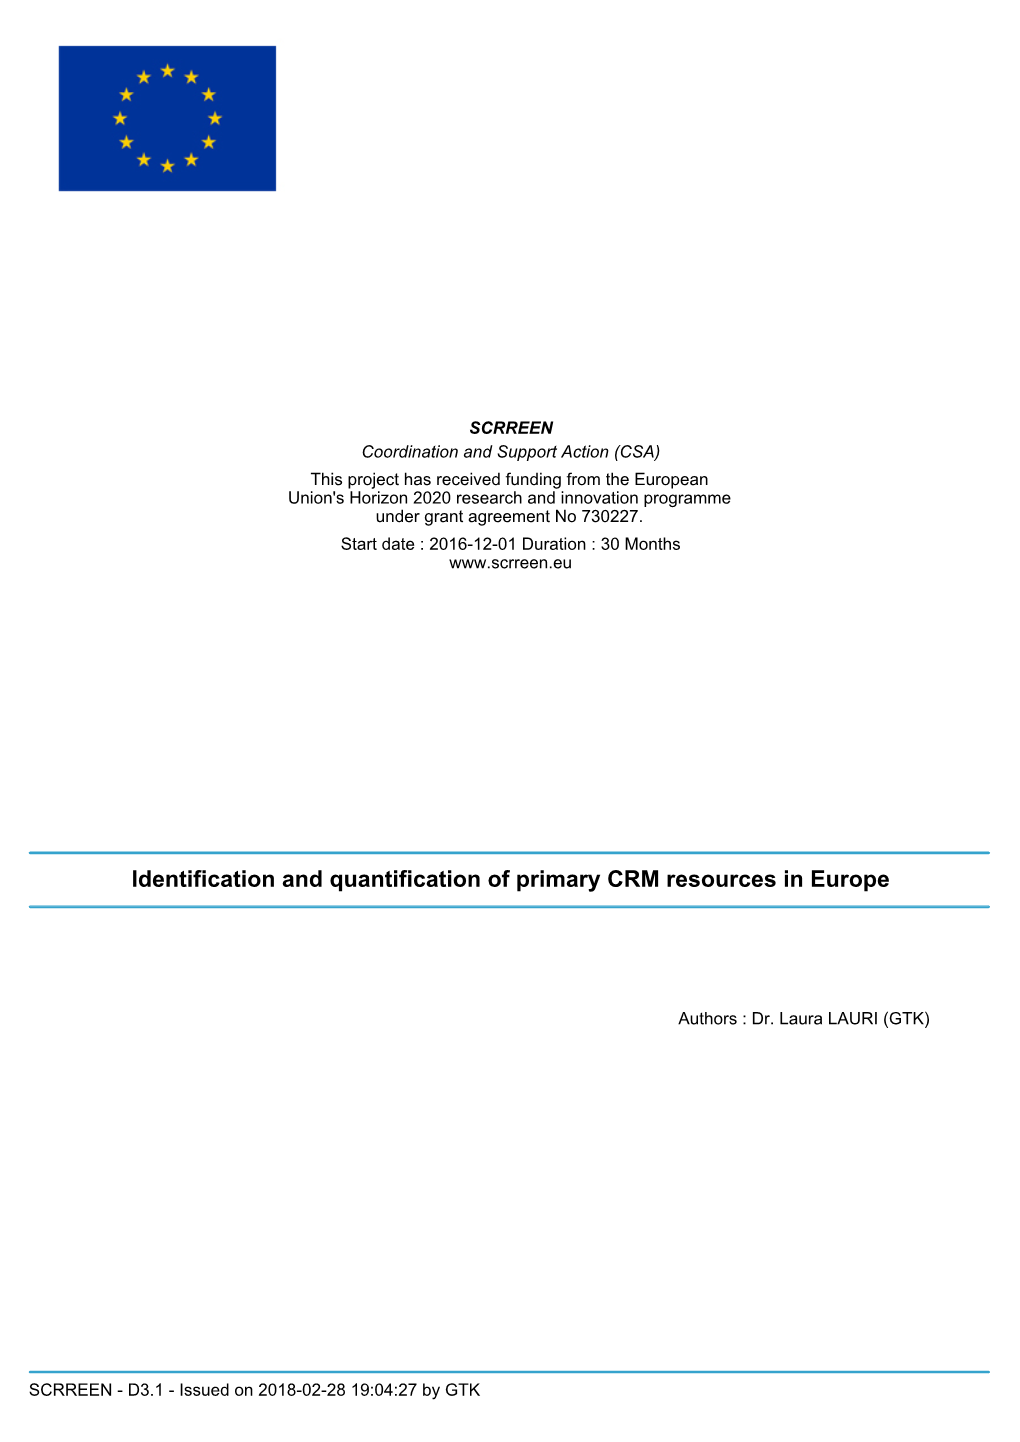 Identification and Quantification of Primary CRM Resources in Europe